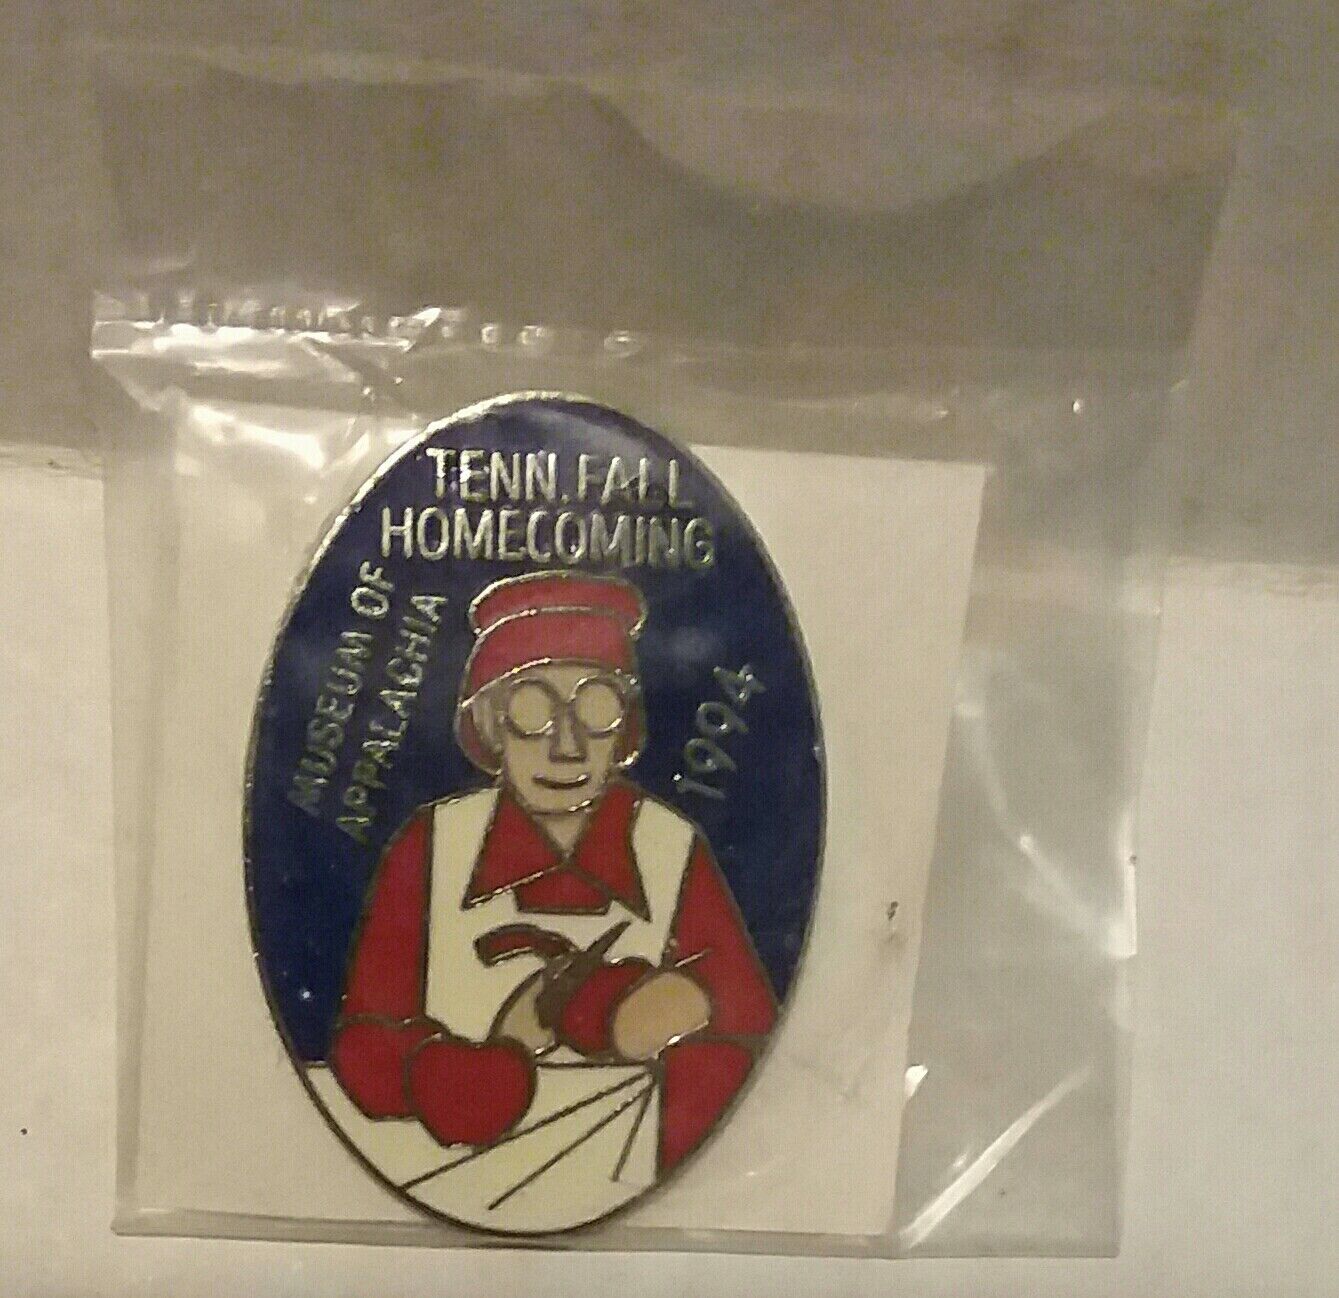 Museum of Appalachia 1994 Tennessee Fall Homecoming Enamel Pinback NWOT New